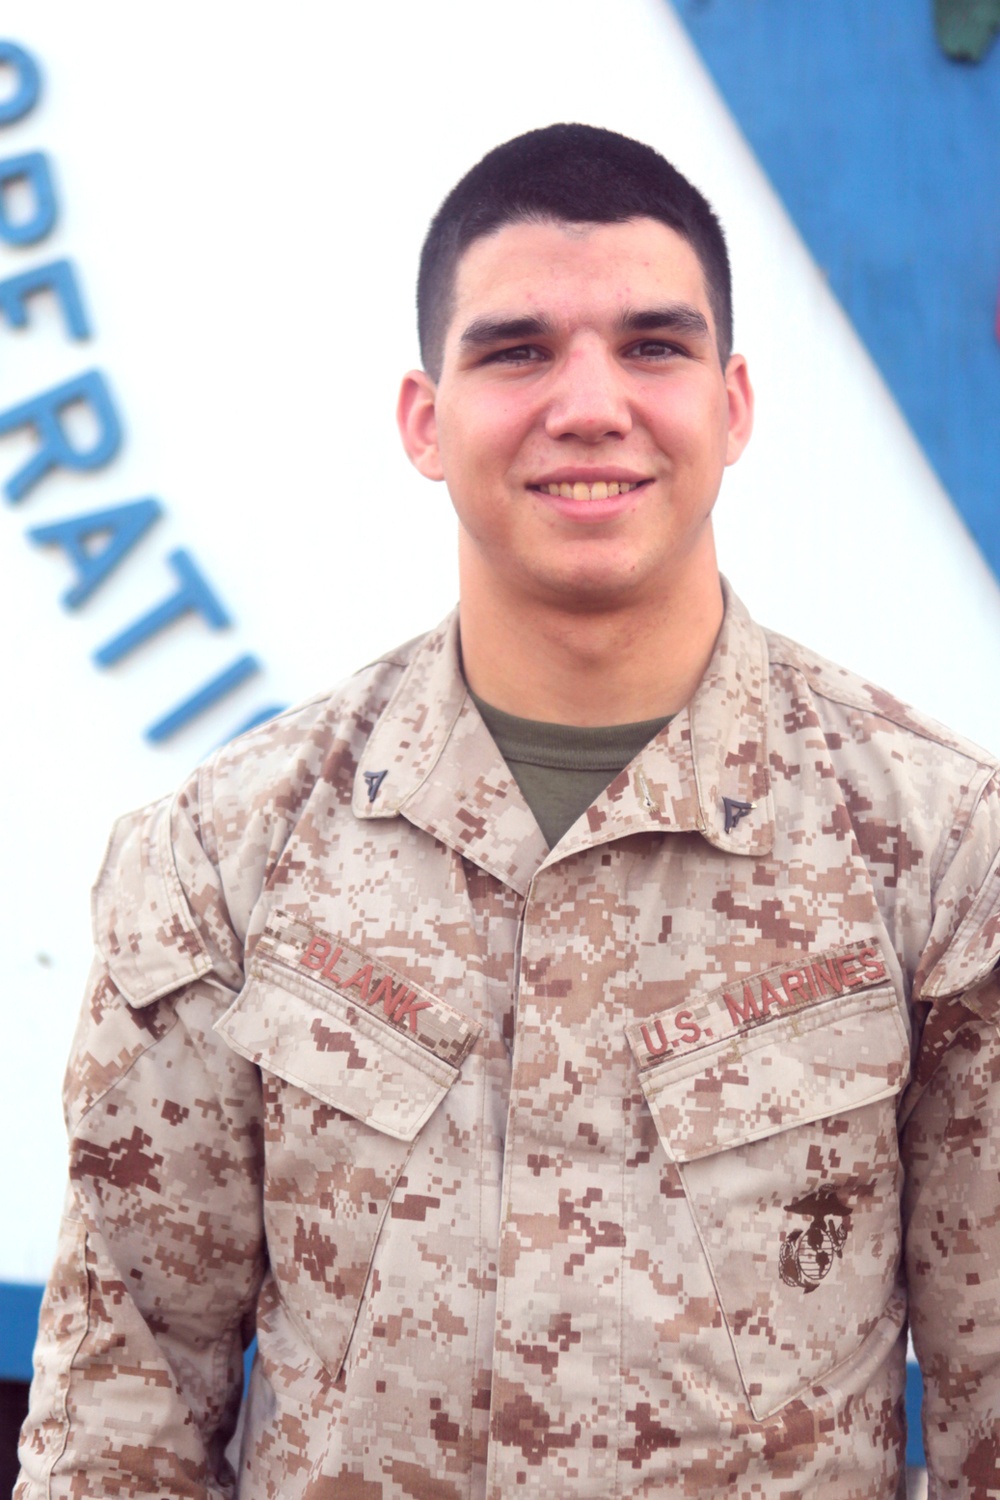 Southern Calif. Marine works with Afghan linguists